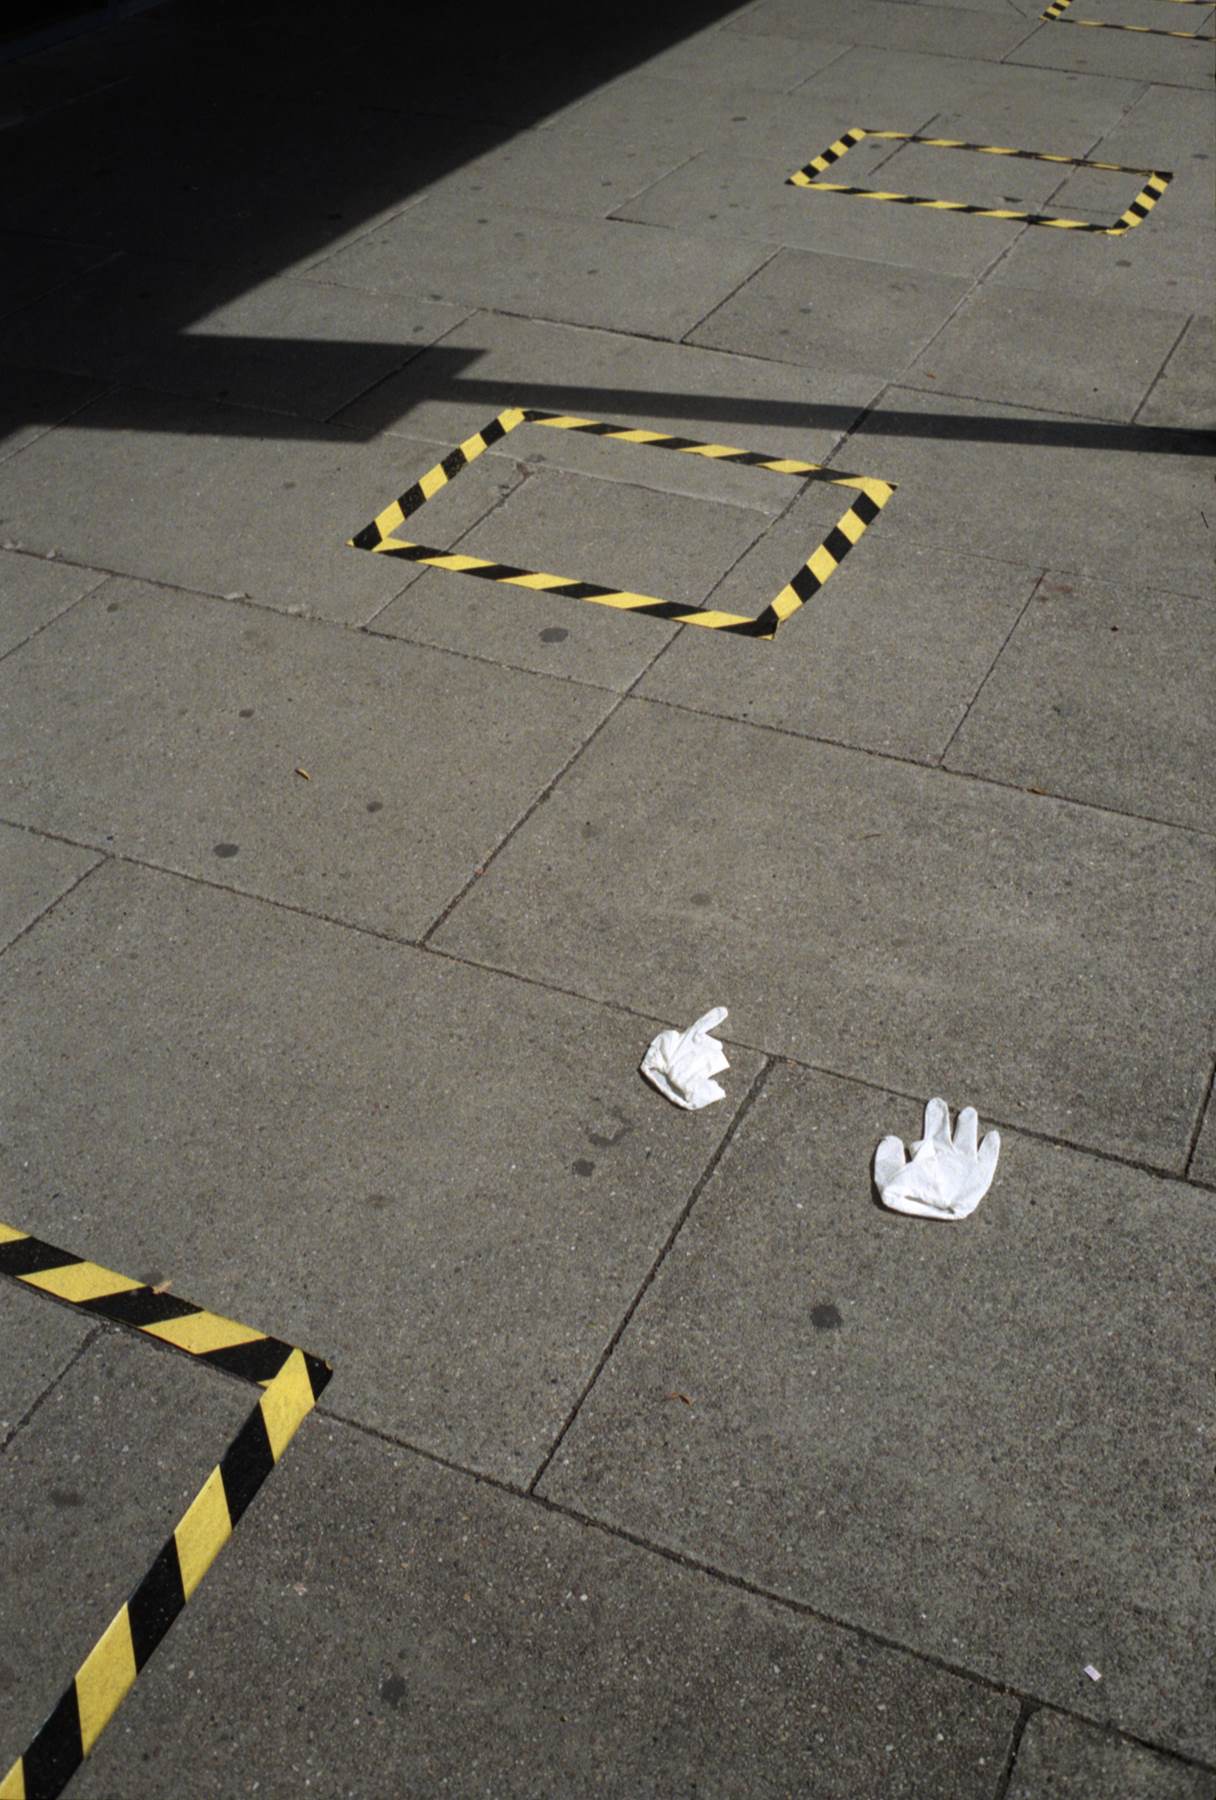 white gloves discarded on ground with hazzard tape on ground for queuing